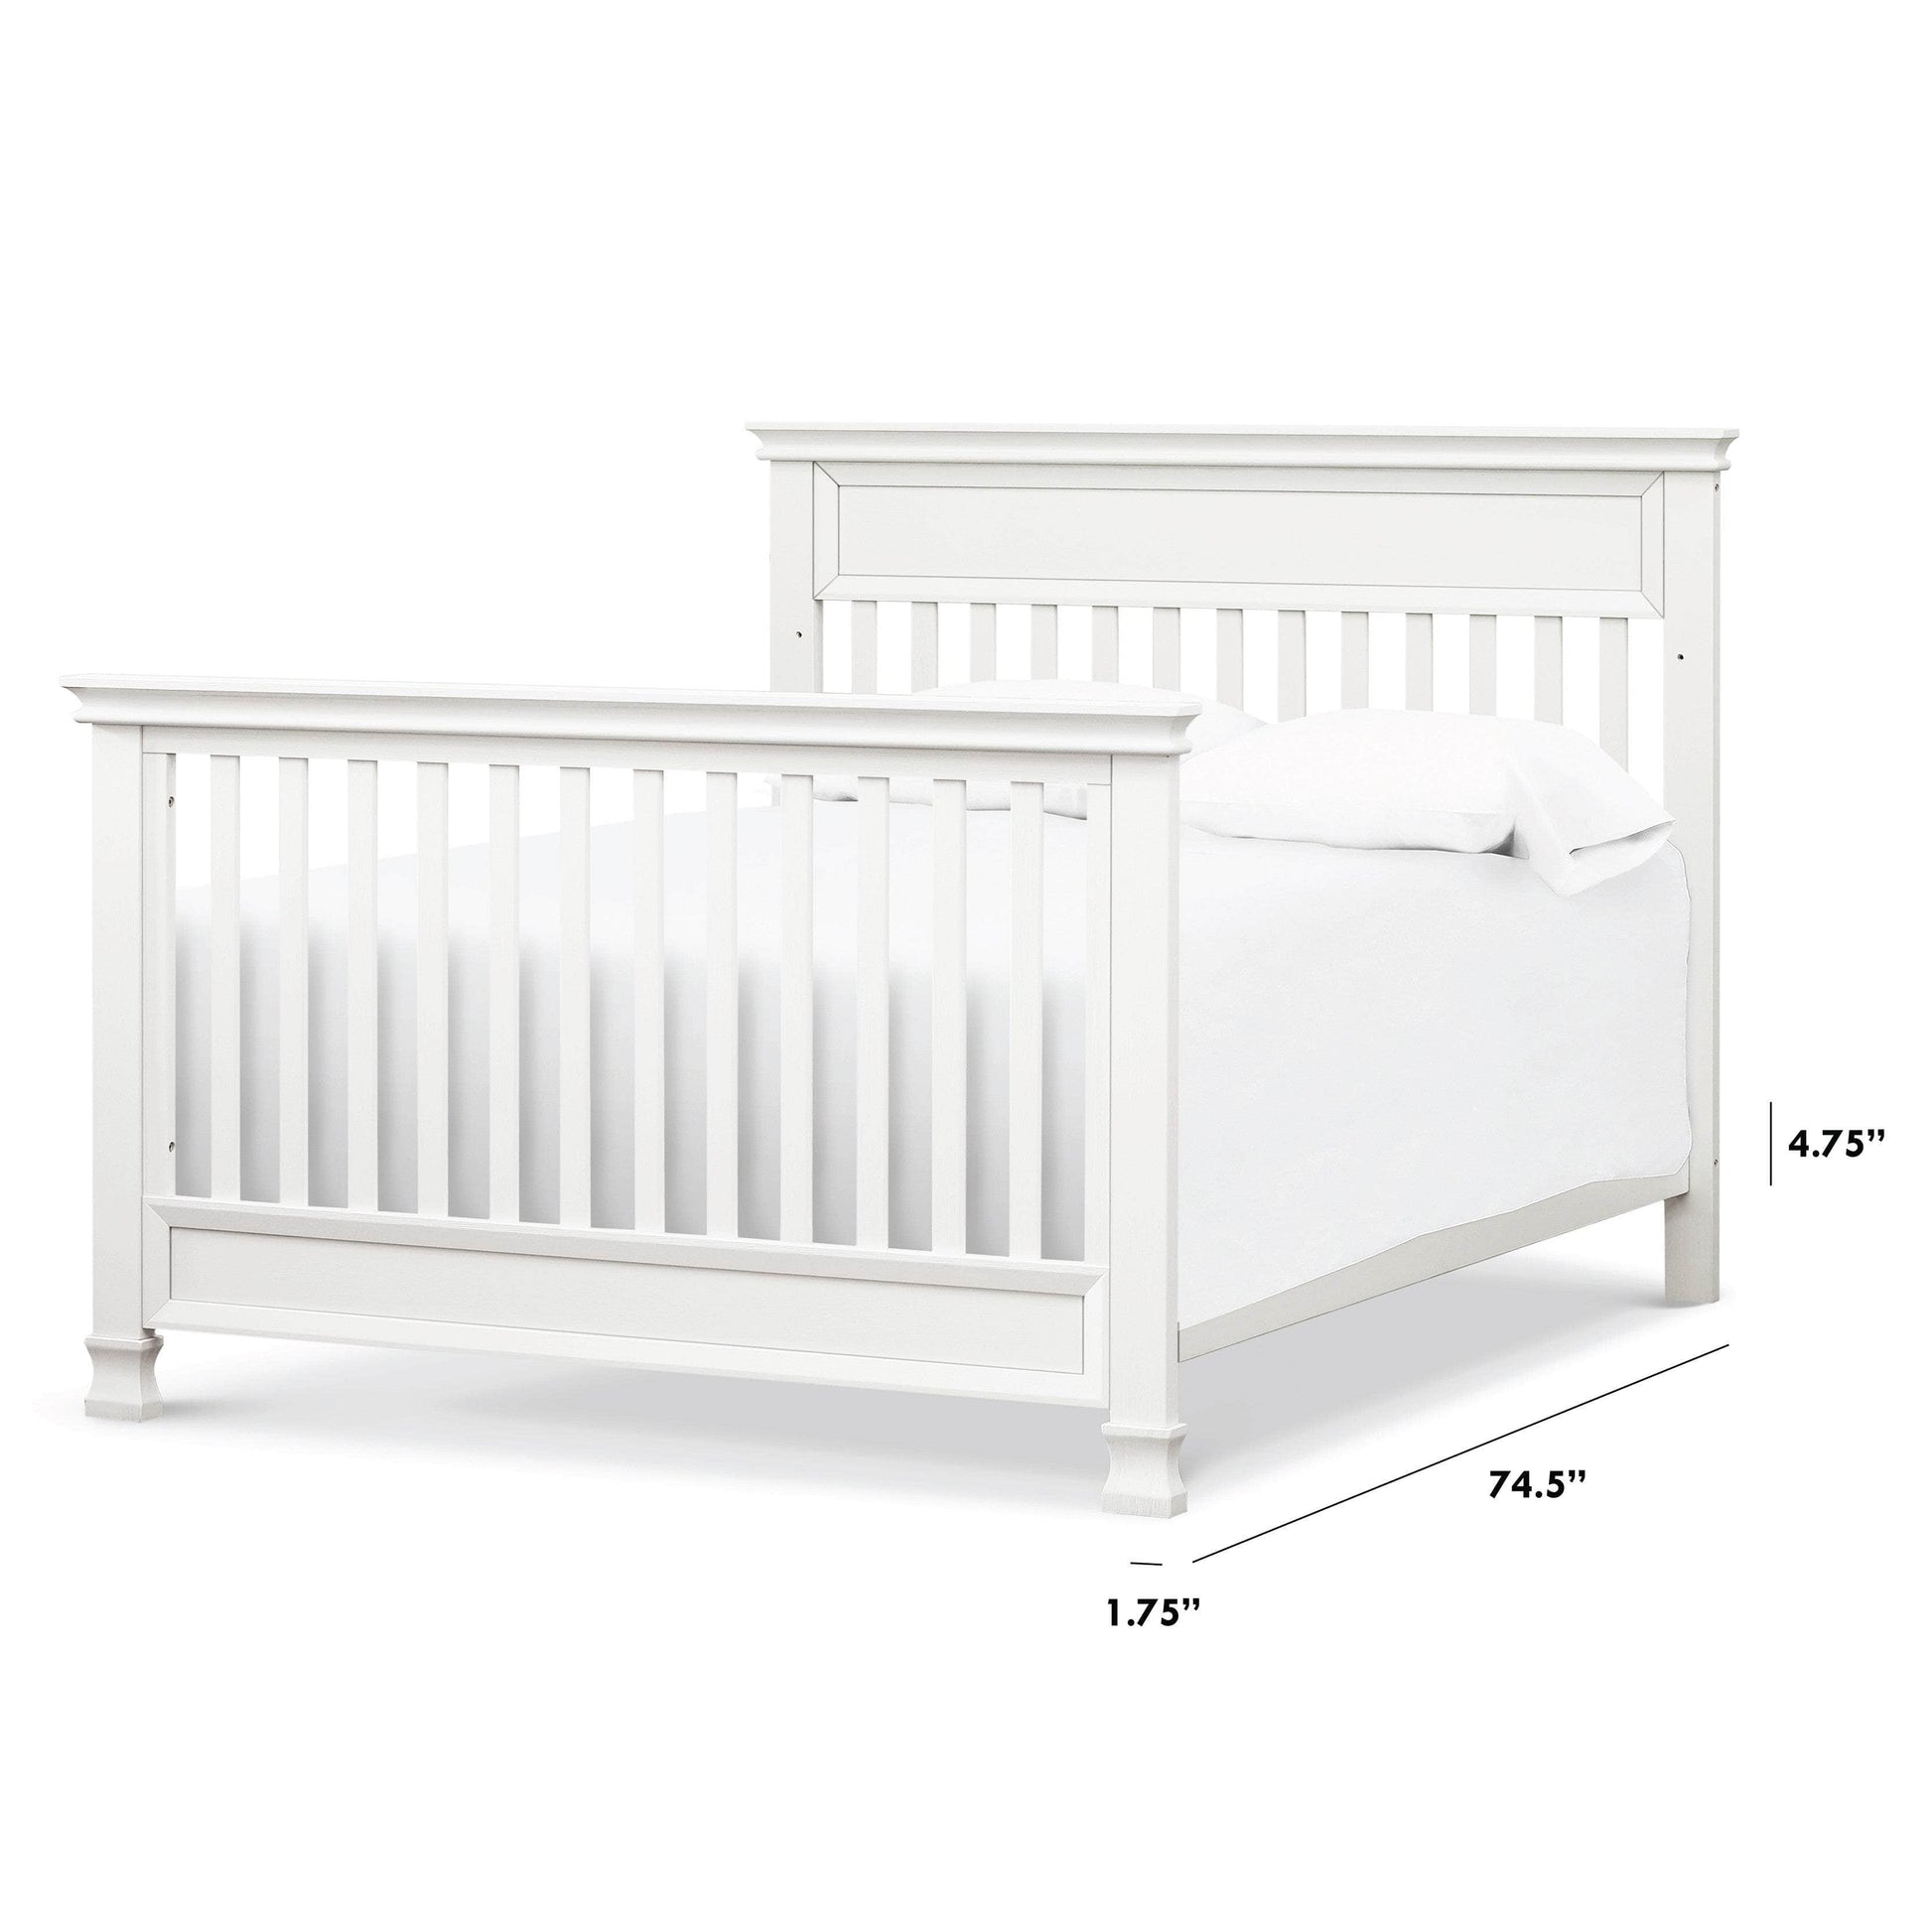 M5789RW,Hidden Hardware Twin/Full Size Bed Conversion Kit in Warm White